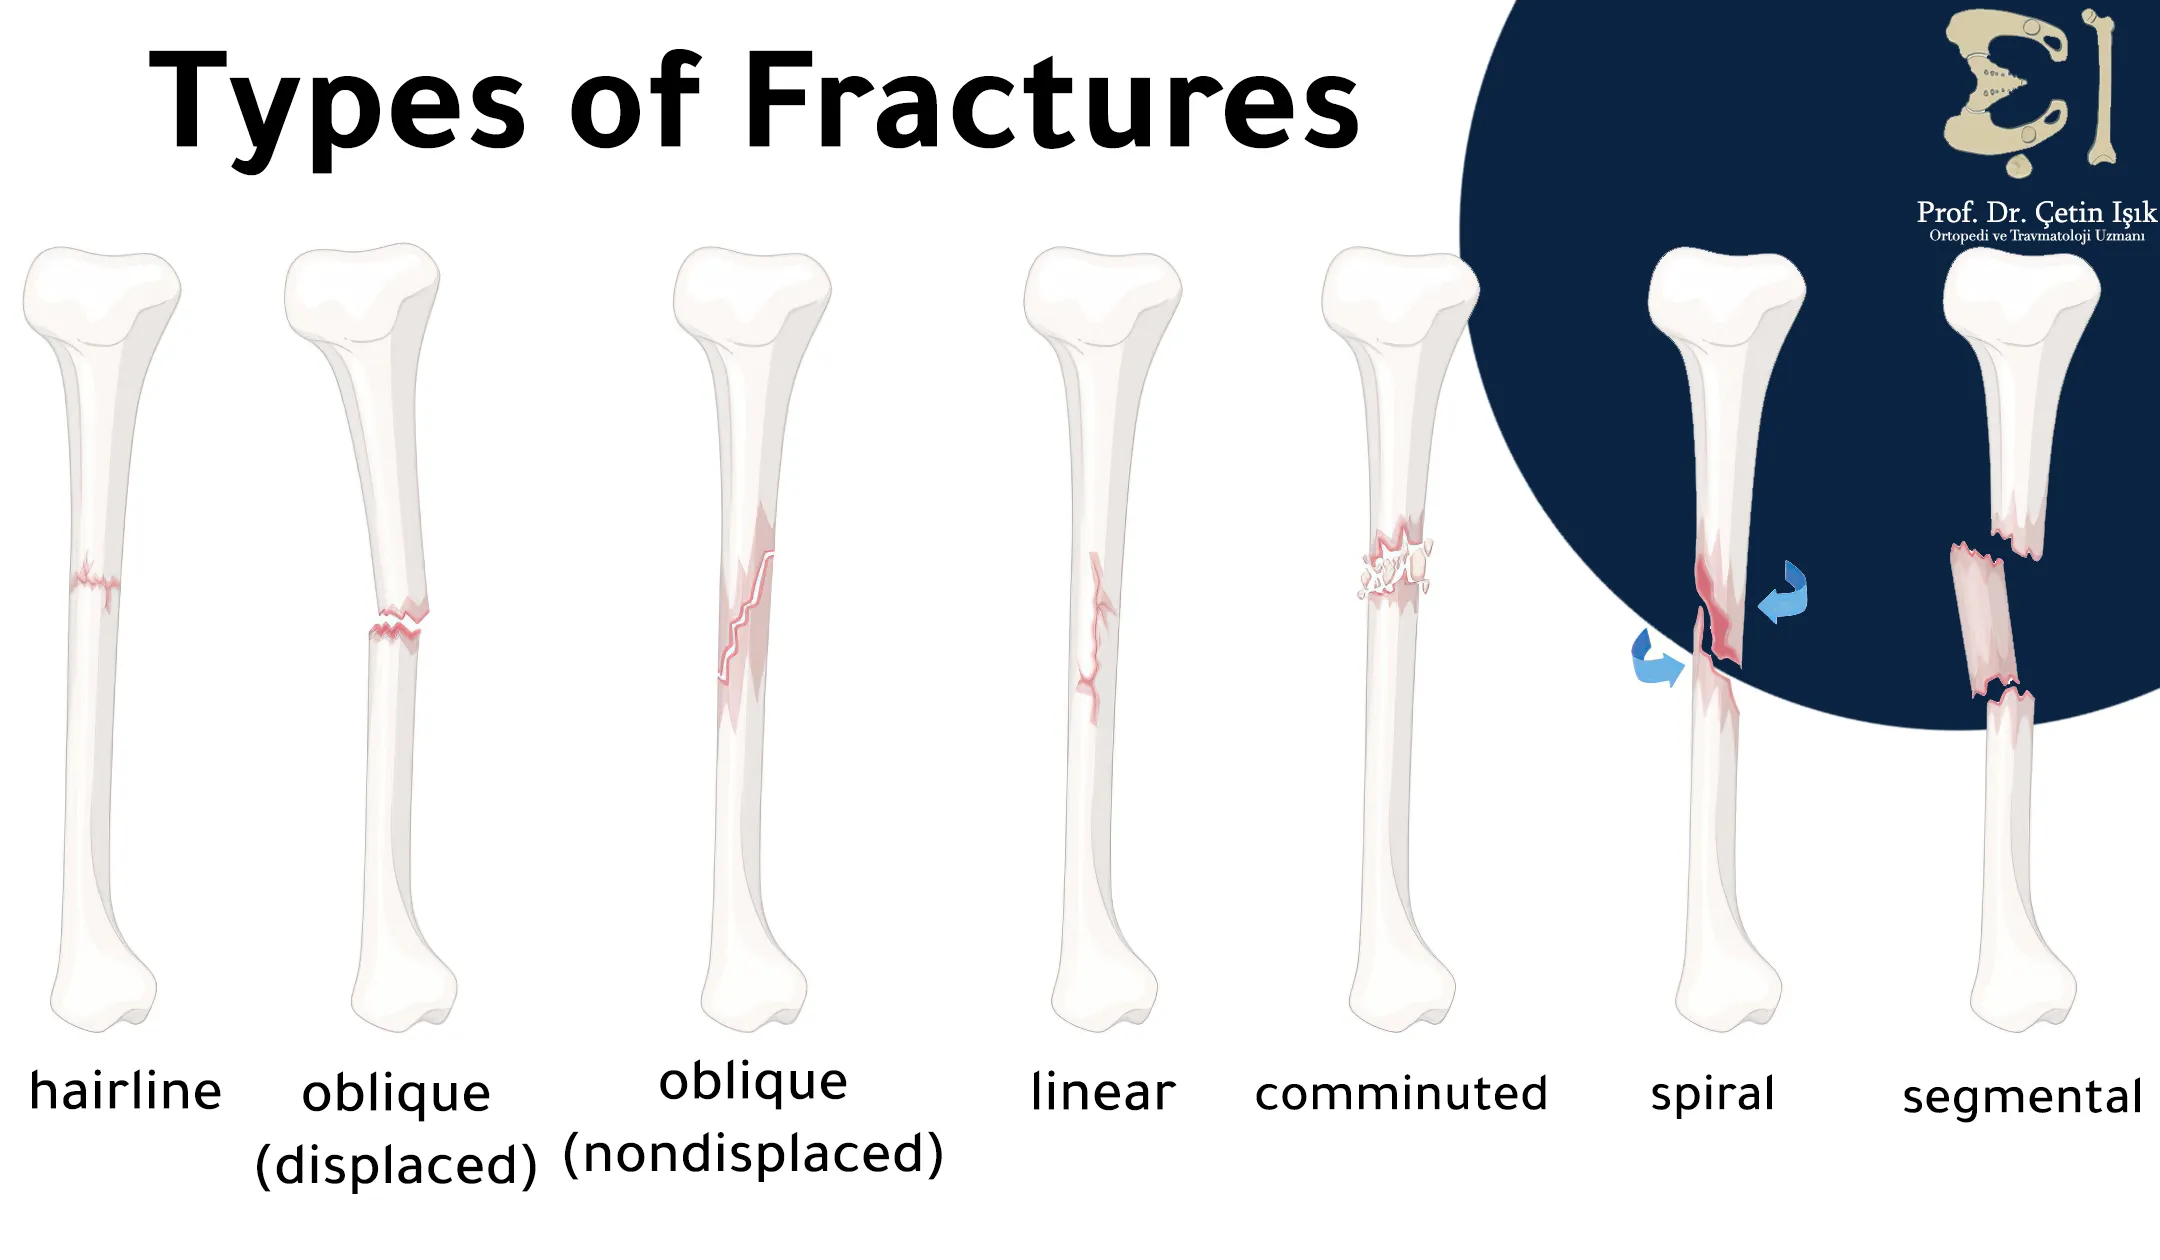 There are seven types of leg fractures: segmental, spiral, comminuted, linear, hairline, and altered or non-altered fractures.